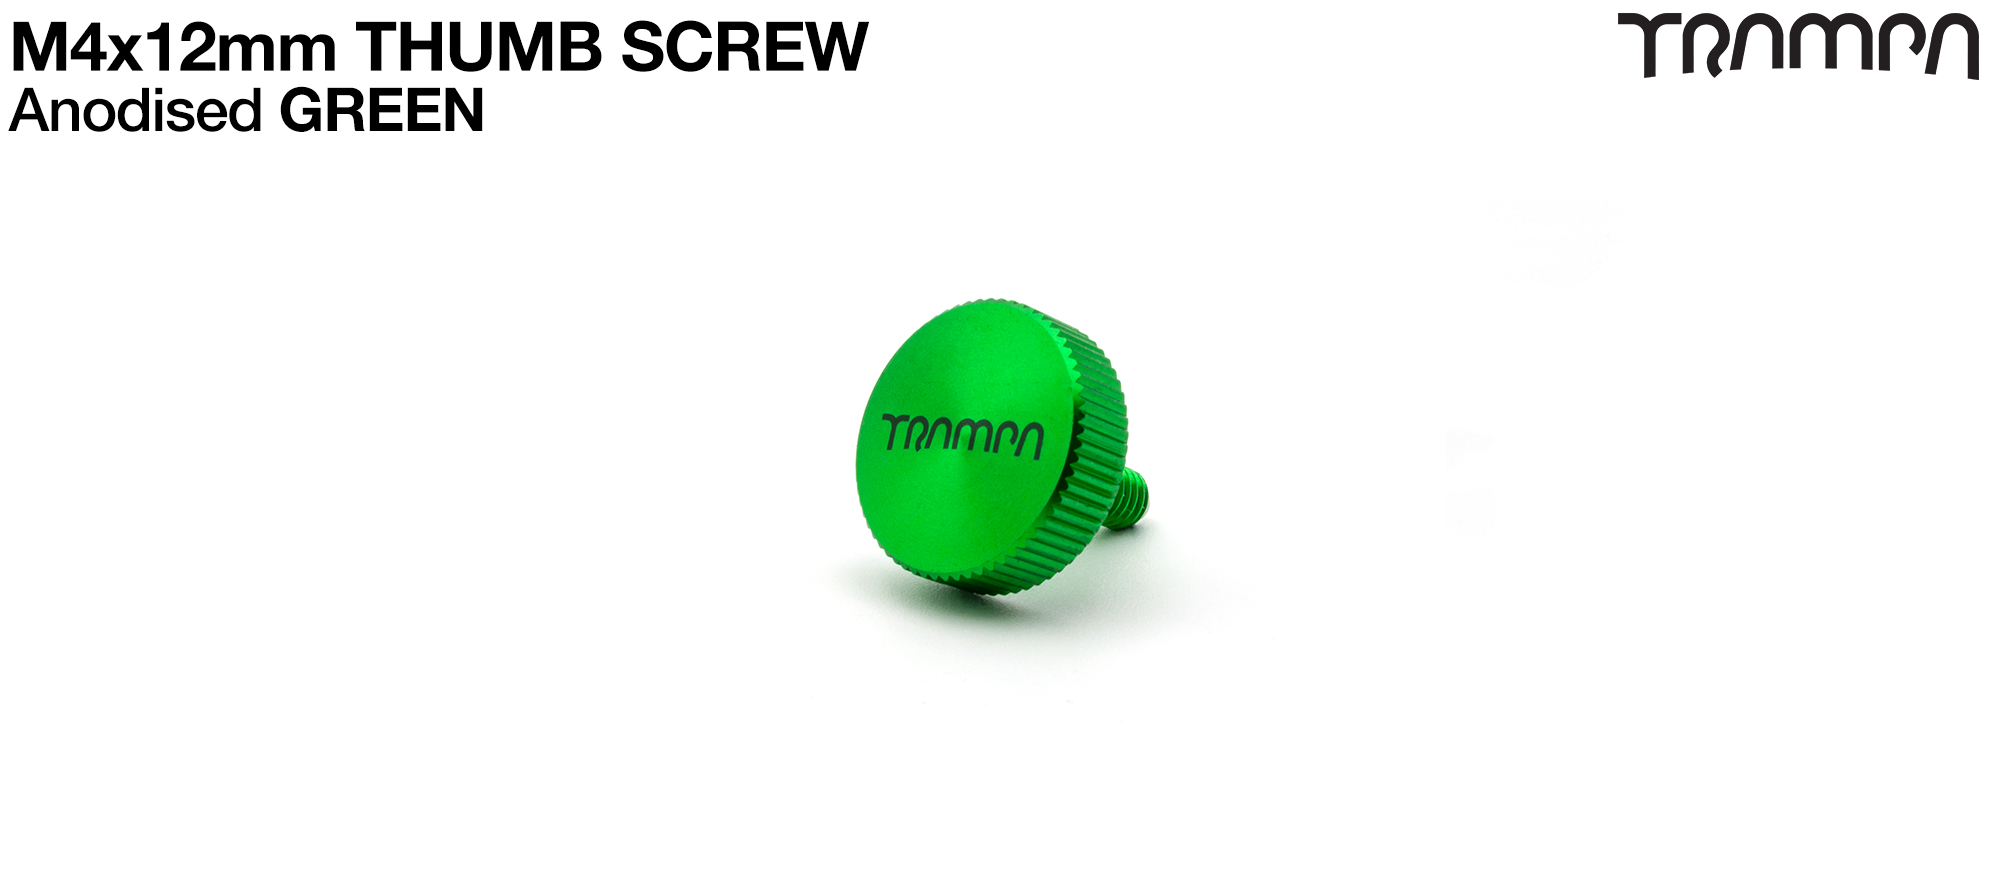 Inspection pit thumb Screw - GREEN 